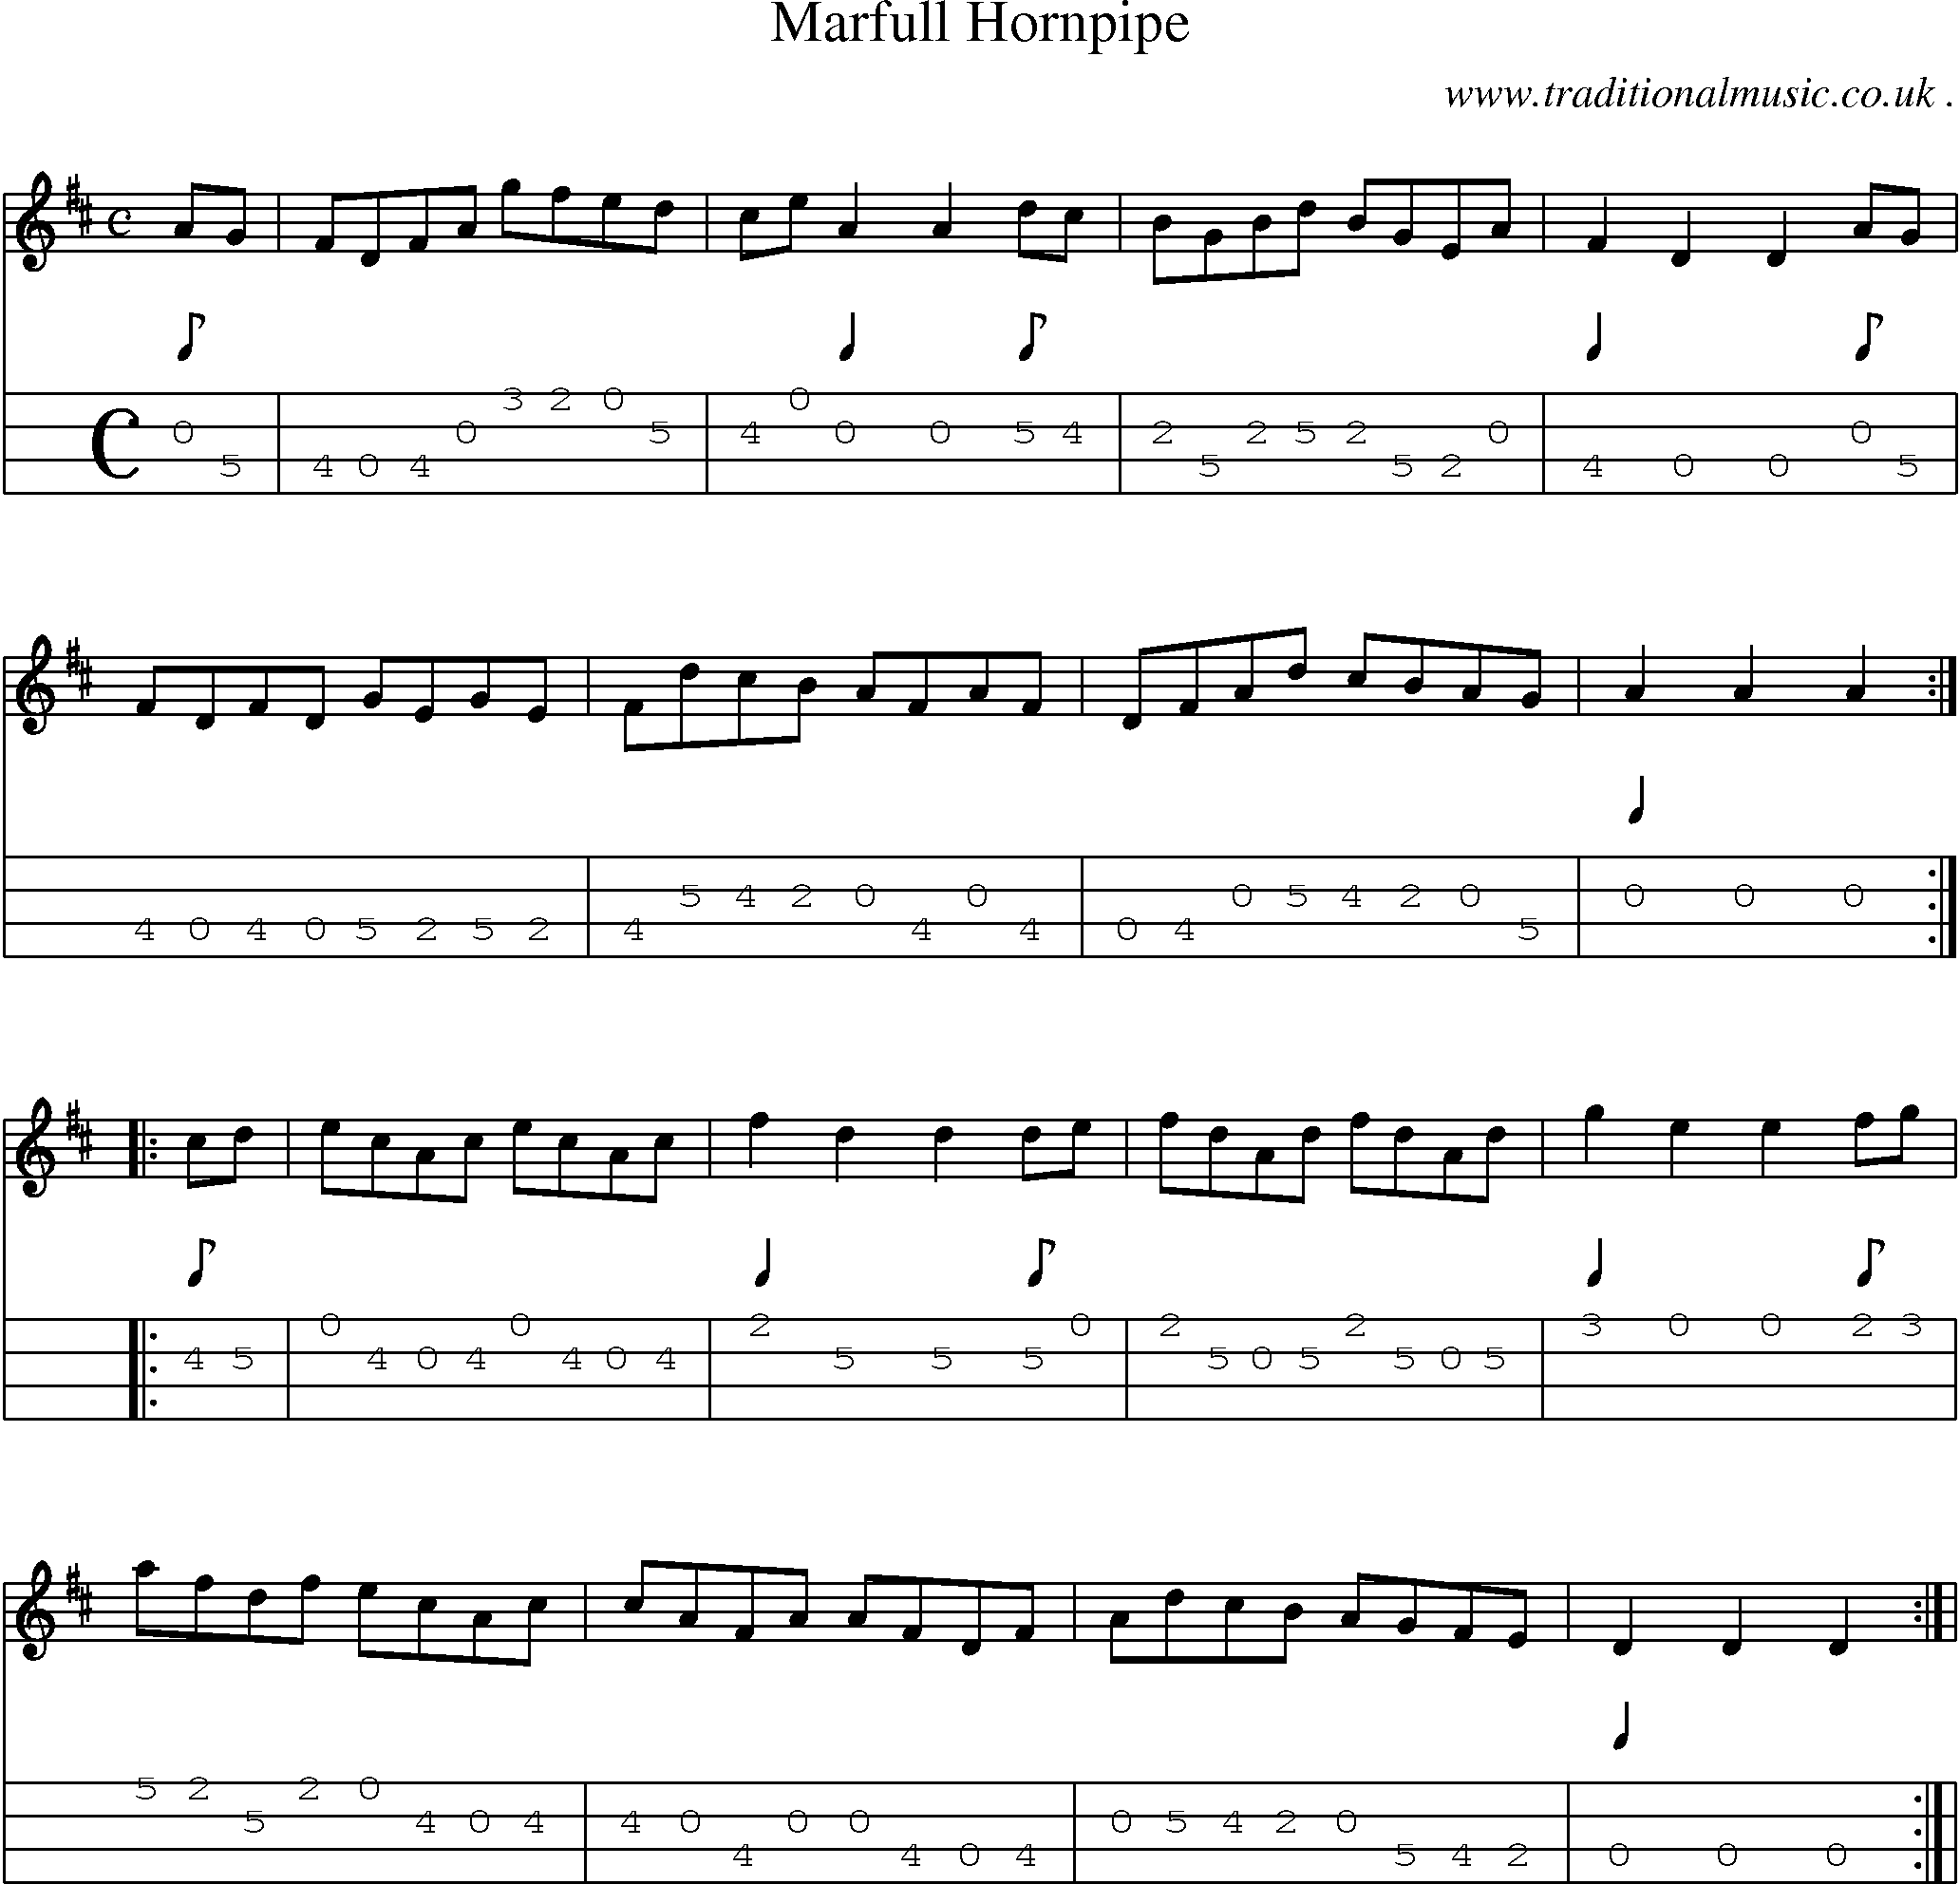 Sheet-Music and Mandolin Tabs for Marfull Hornpipe